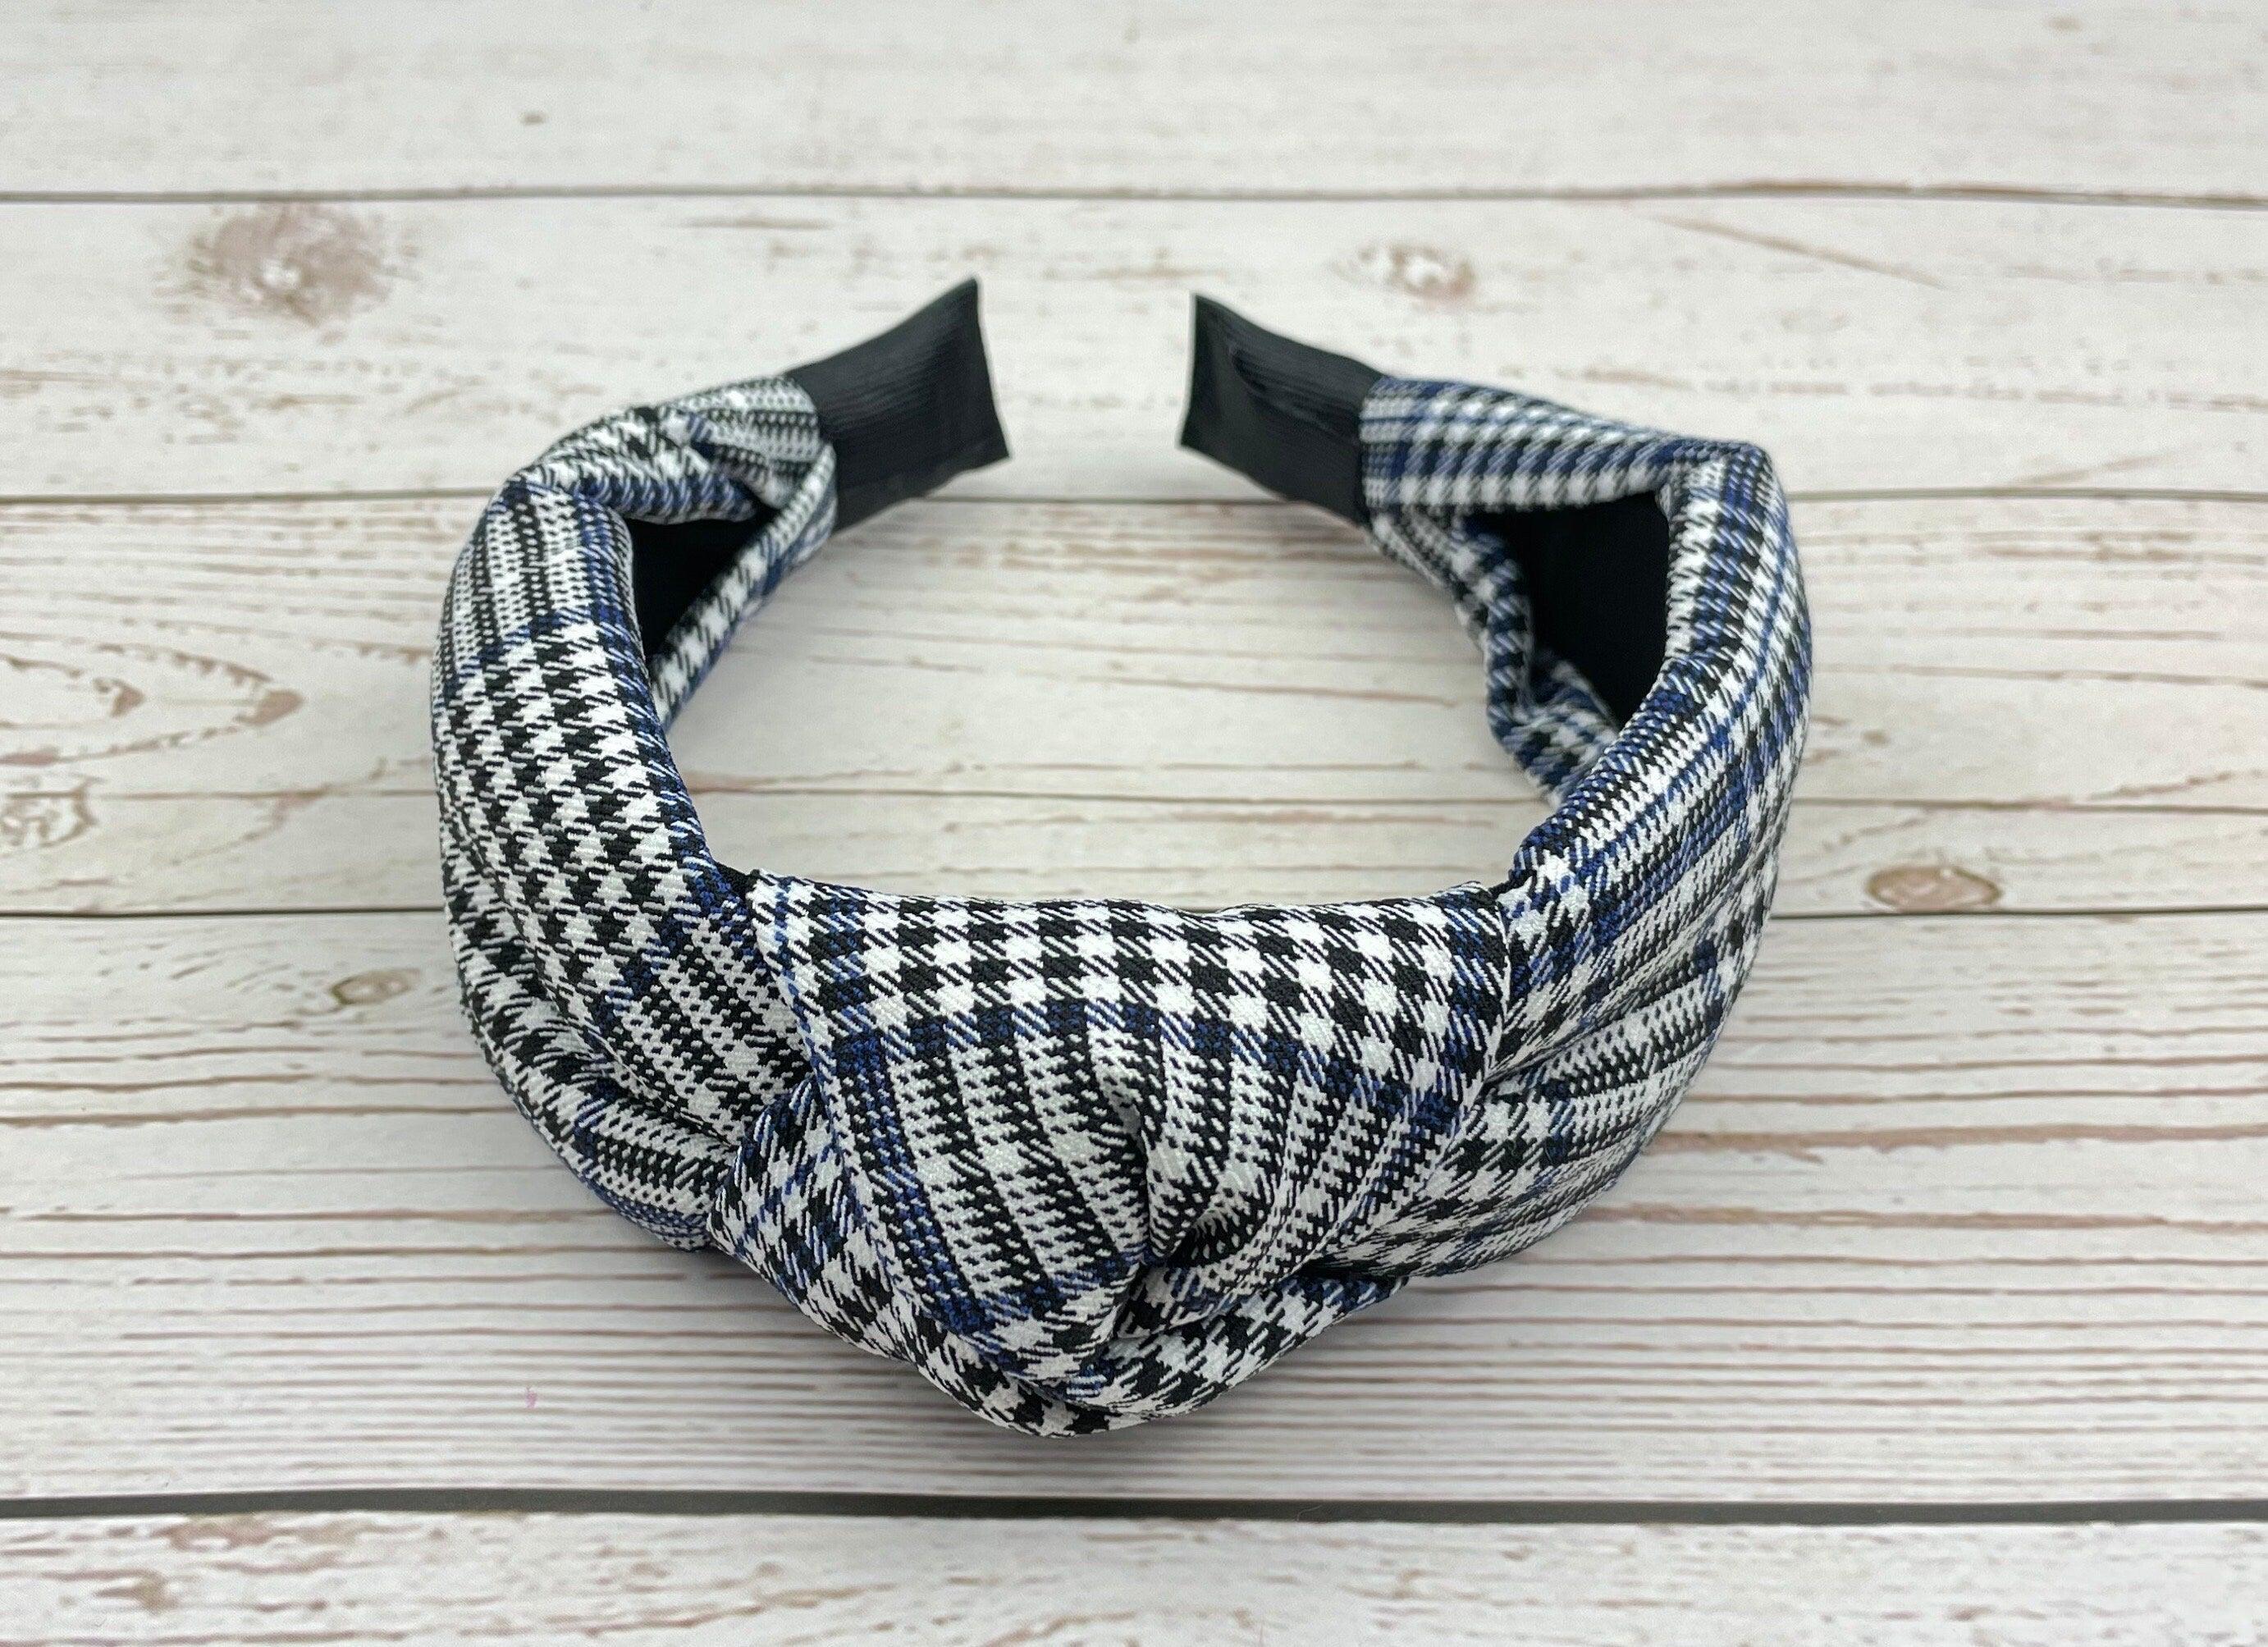 Delicate Classic Knotted Headband in Crepe White and Black with Dark Blue Stripes - Fashionable Hair Accessory for Women, Perfect for College available at Moyoni Design